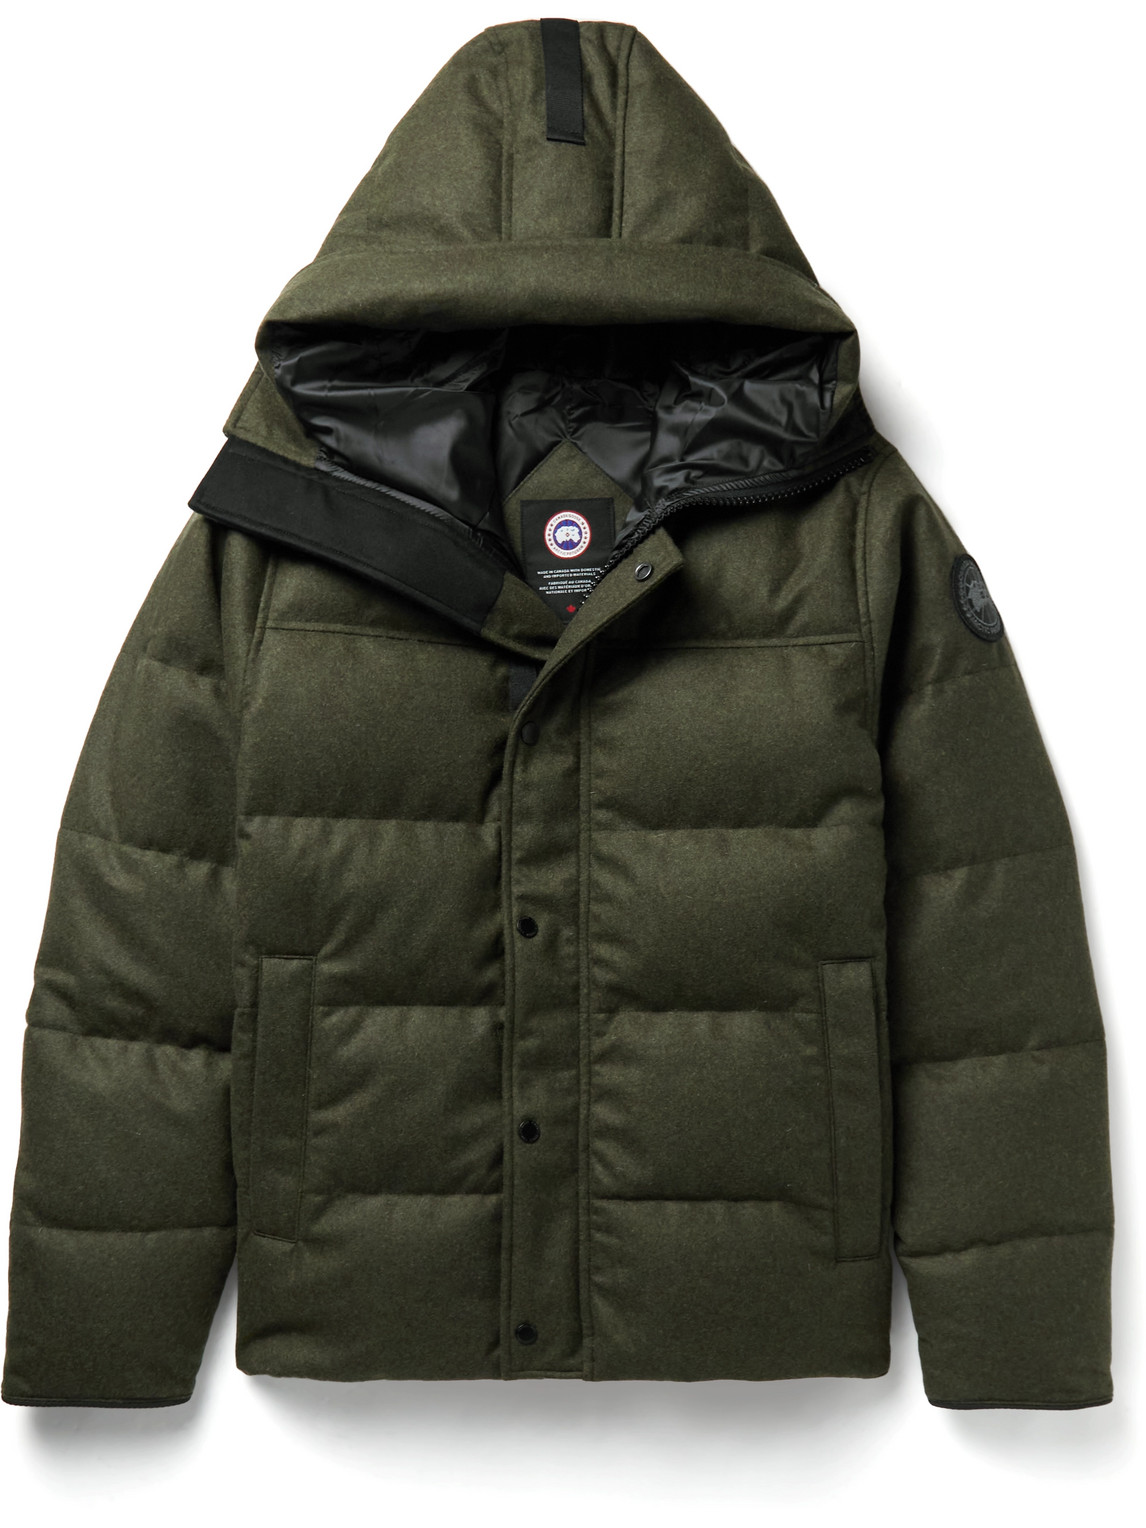 Canada Goose - Macmillian Logo-Appliquéd Quilted Recycled Wool-Blend Hooded Down Parka - Men - Green - M